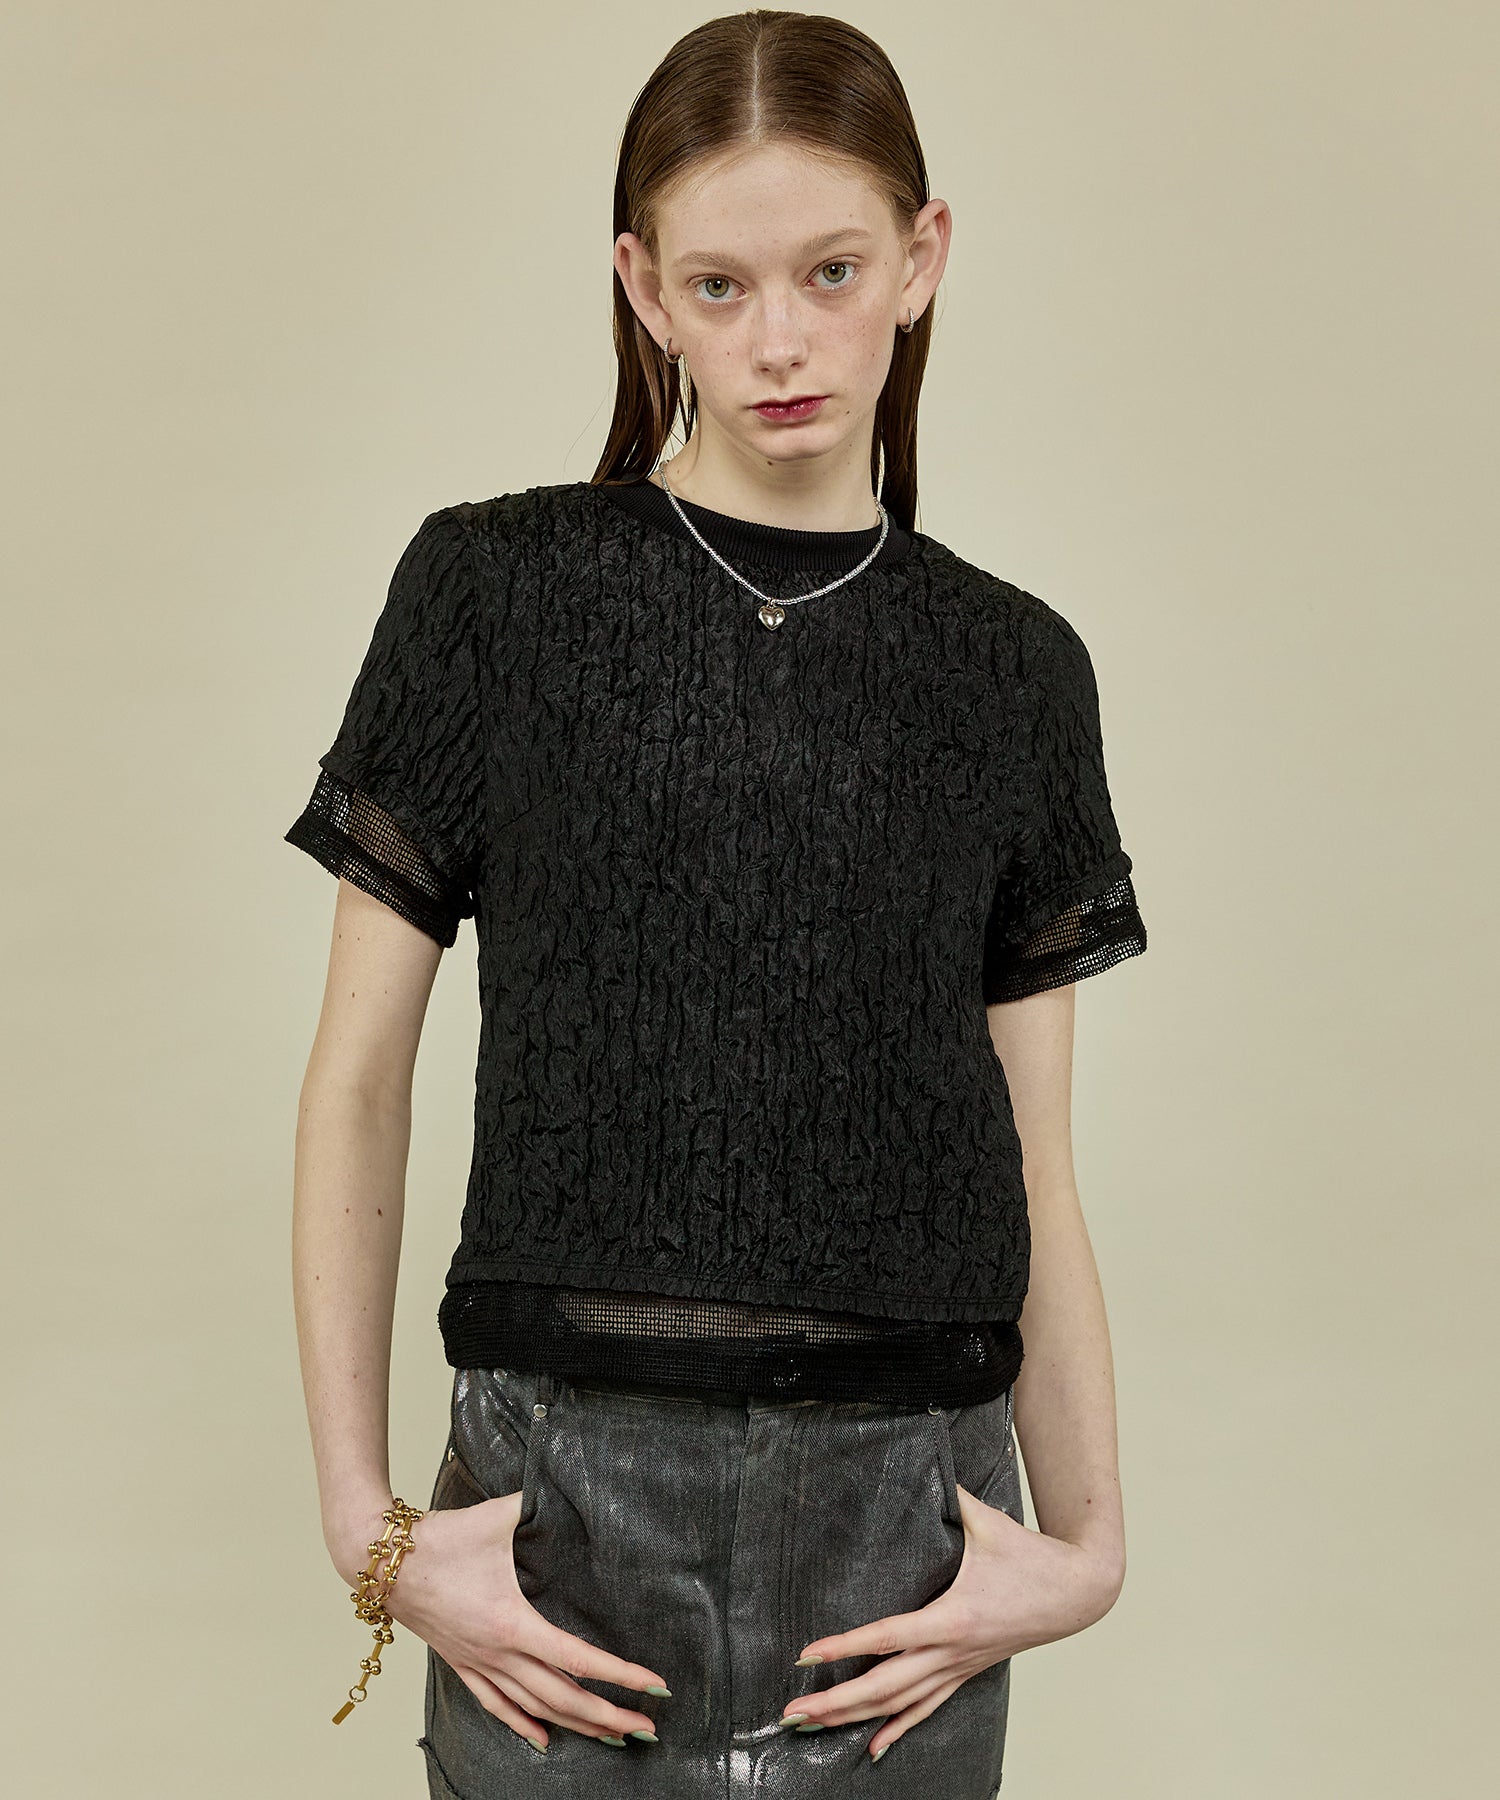 Floating JACQUARD COMPACT TOPS